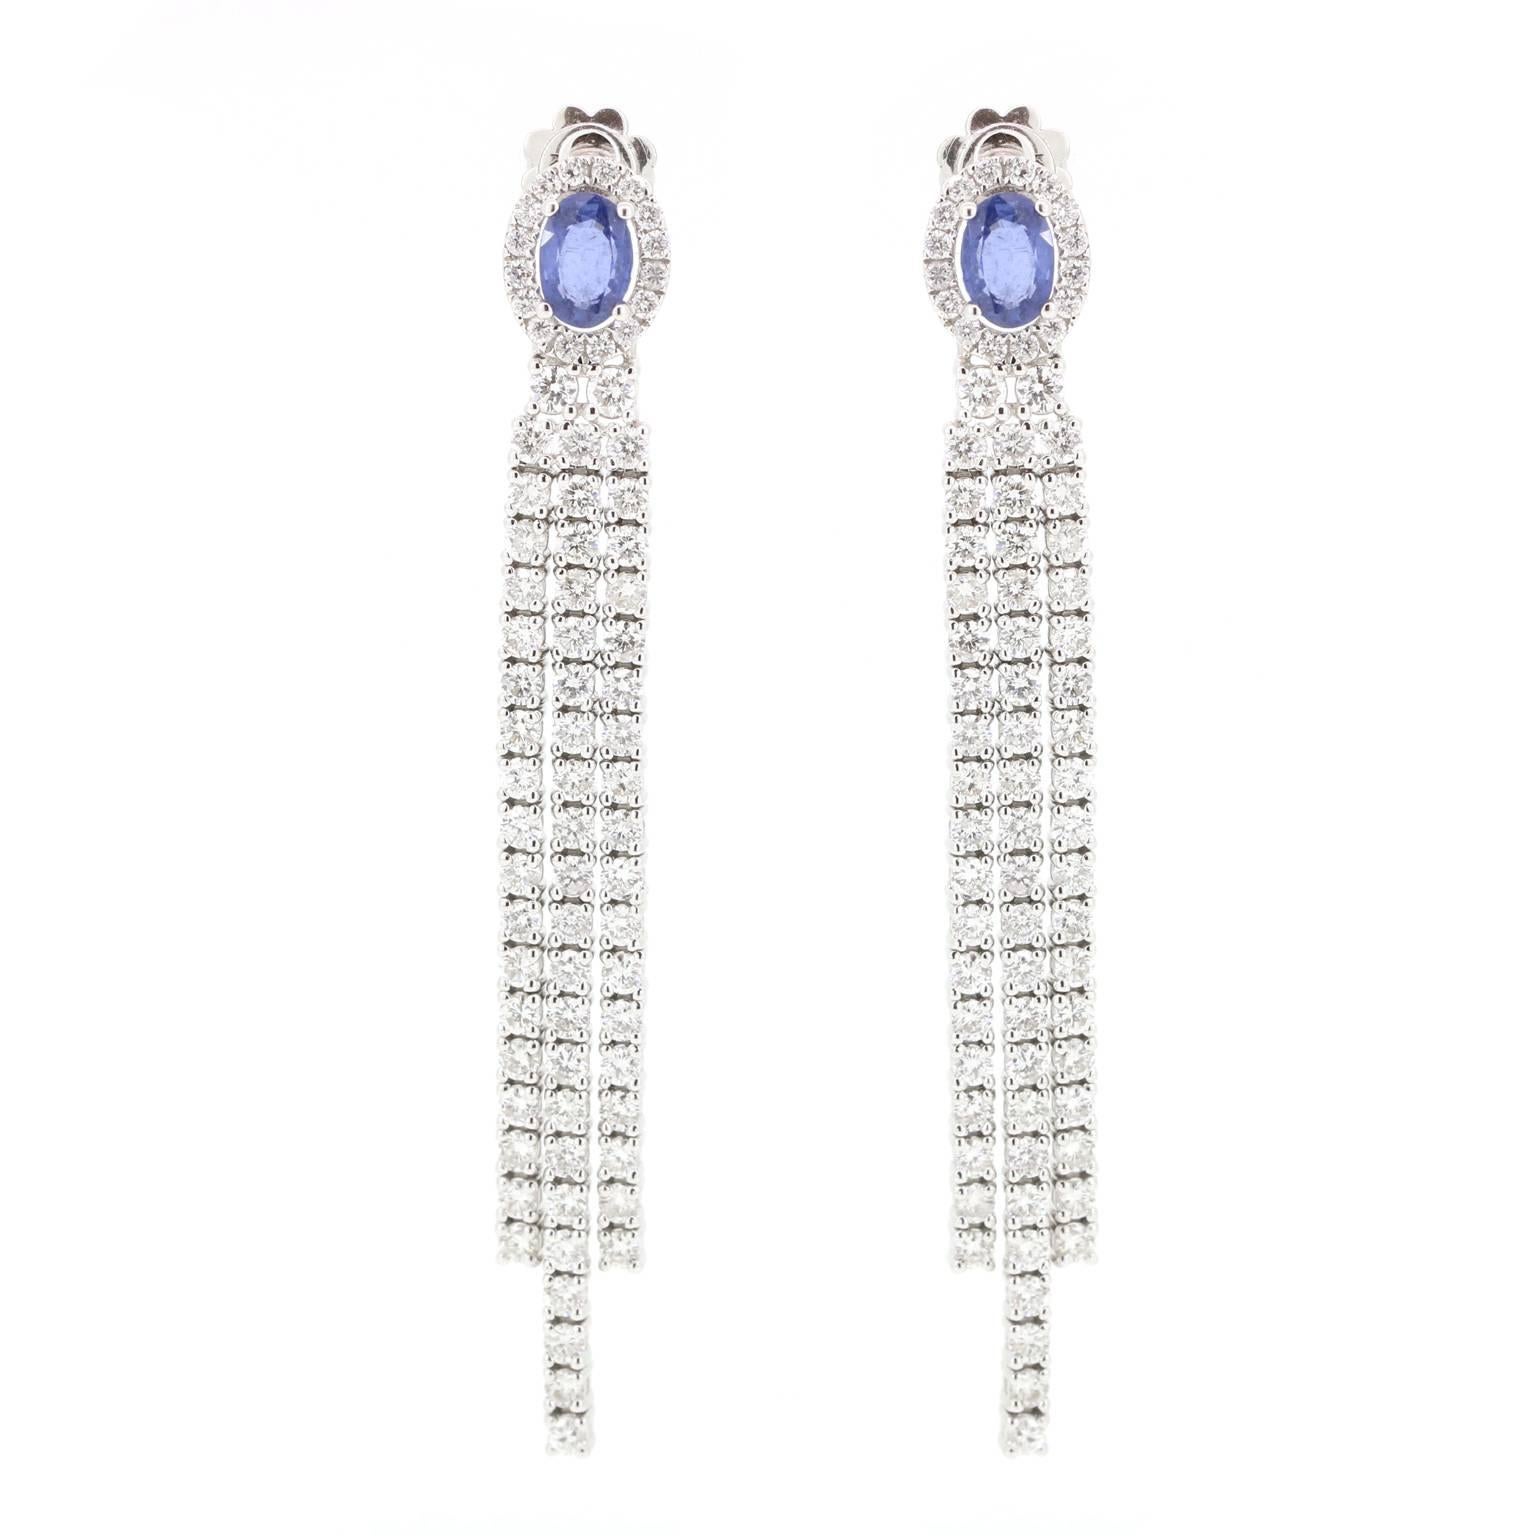 Elegant Blue Sapphire and Diamond linear drop earring is the perfect black tie earring.  Wear your hair up to show off the magnificent sparkle.

Blue Sapphire - 1.96 carats
Diamonds - 4.64 carats
Post / Clutch back

Length - 65mm
Width - 8mm